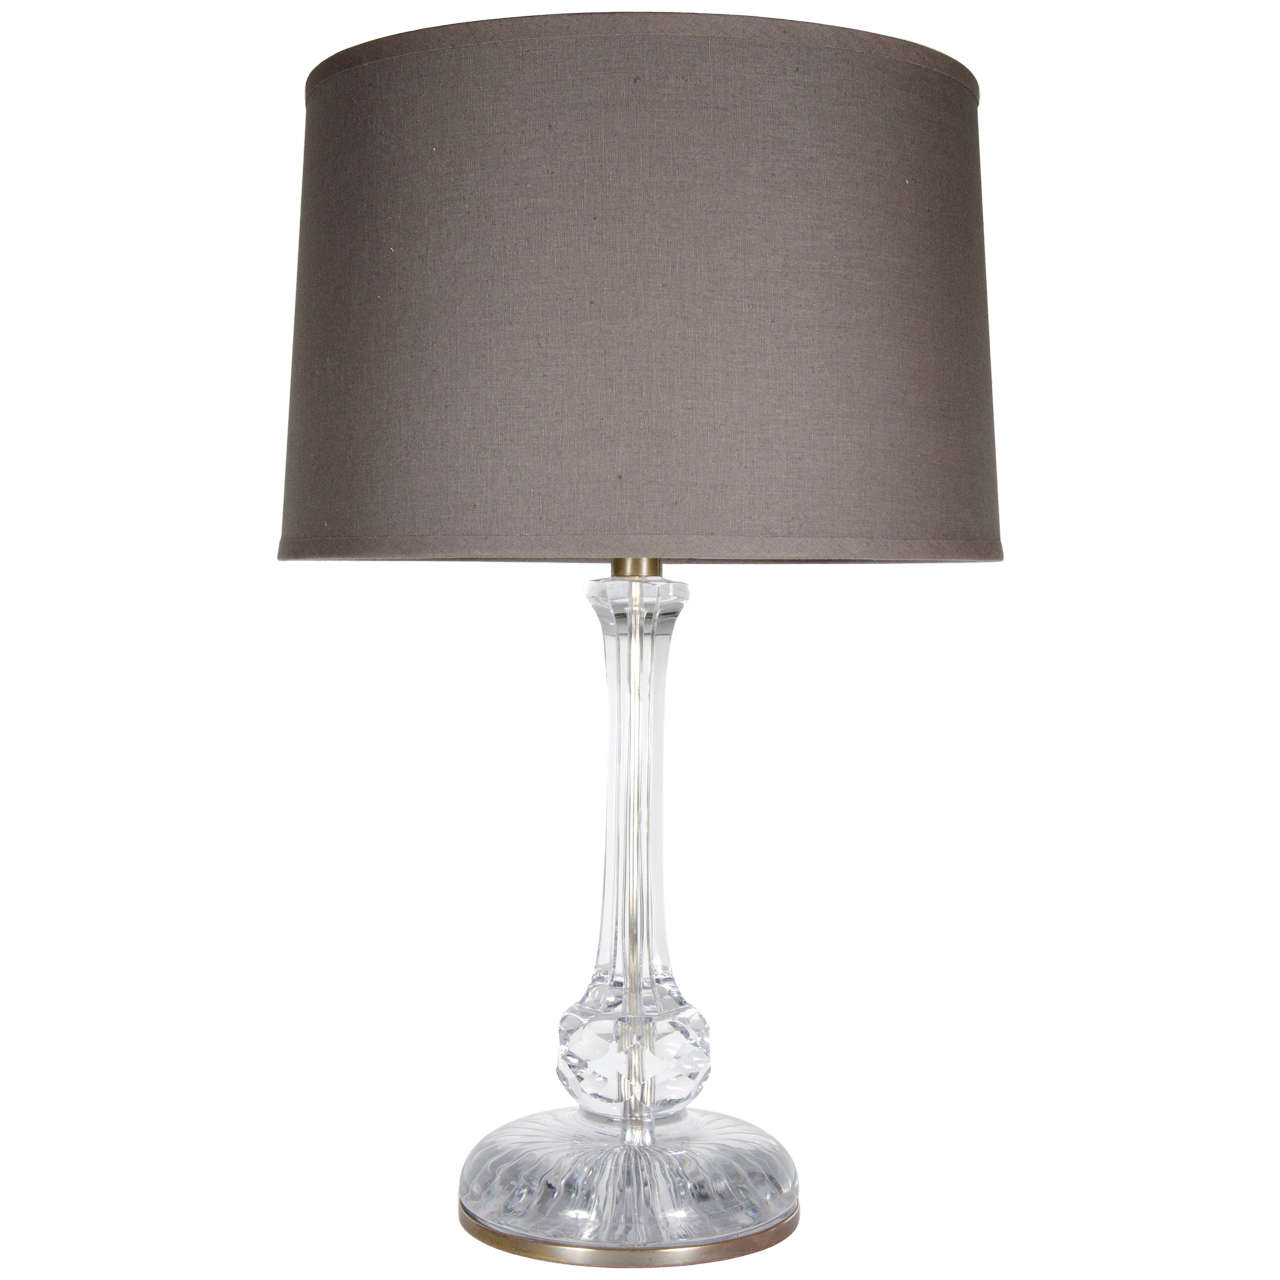 Exquisite Art Deco Crystal Table Lamp by Baccarat